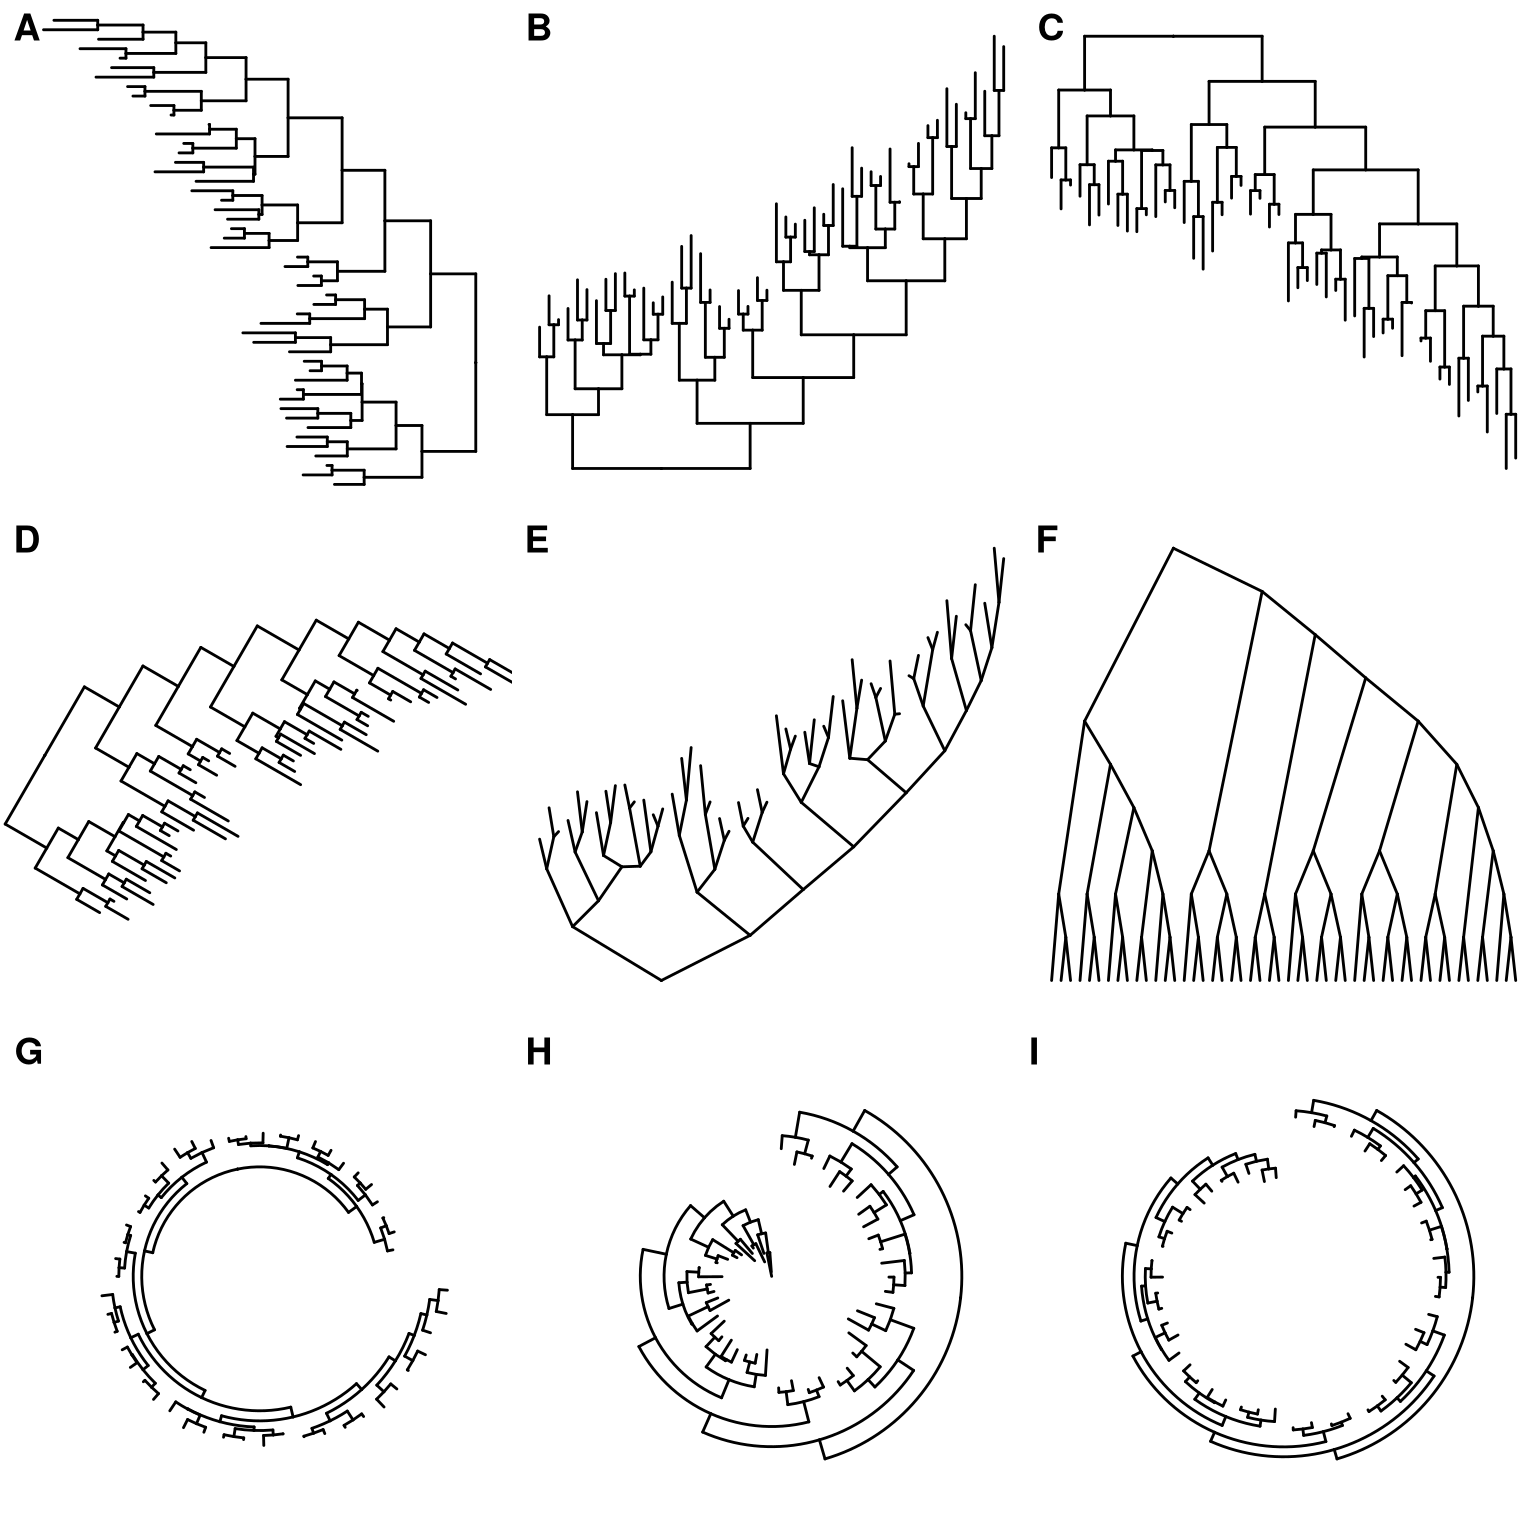 Derived Tree layouts. right-to-left rectangular layout (A), bottom-up rectangular layout (B), top-down rectangular layout (Dendrogram) (C), rotated rectangular layout (D), bottom-up slanted layout (E), top-down slanted layout (Cladogram) (F), circular layout (G), circular inward layout (H and I).